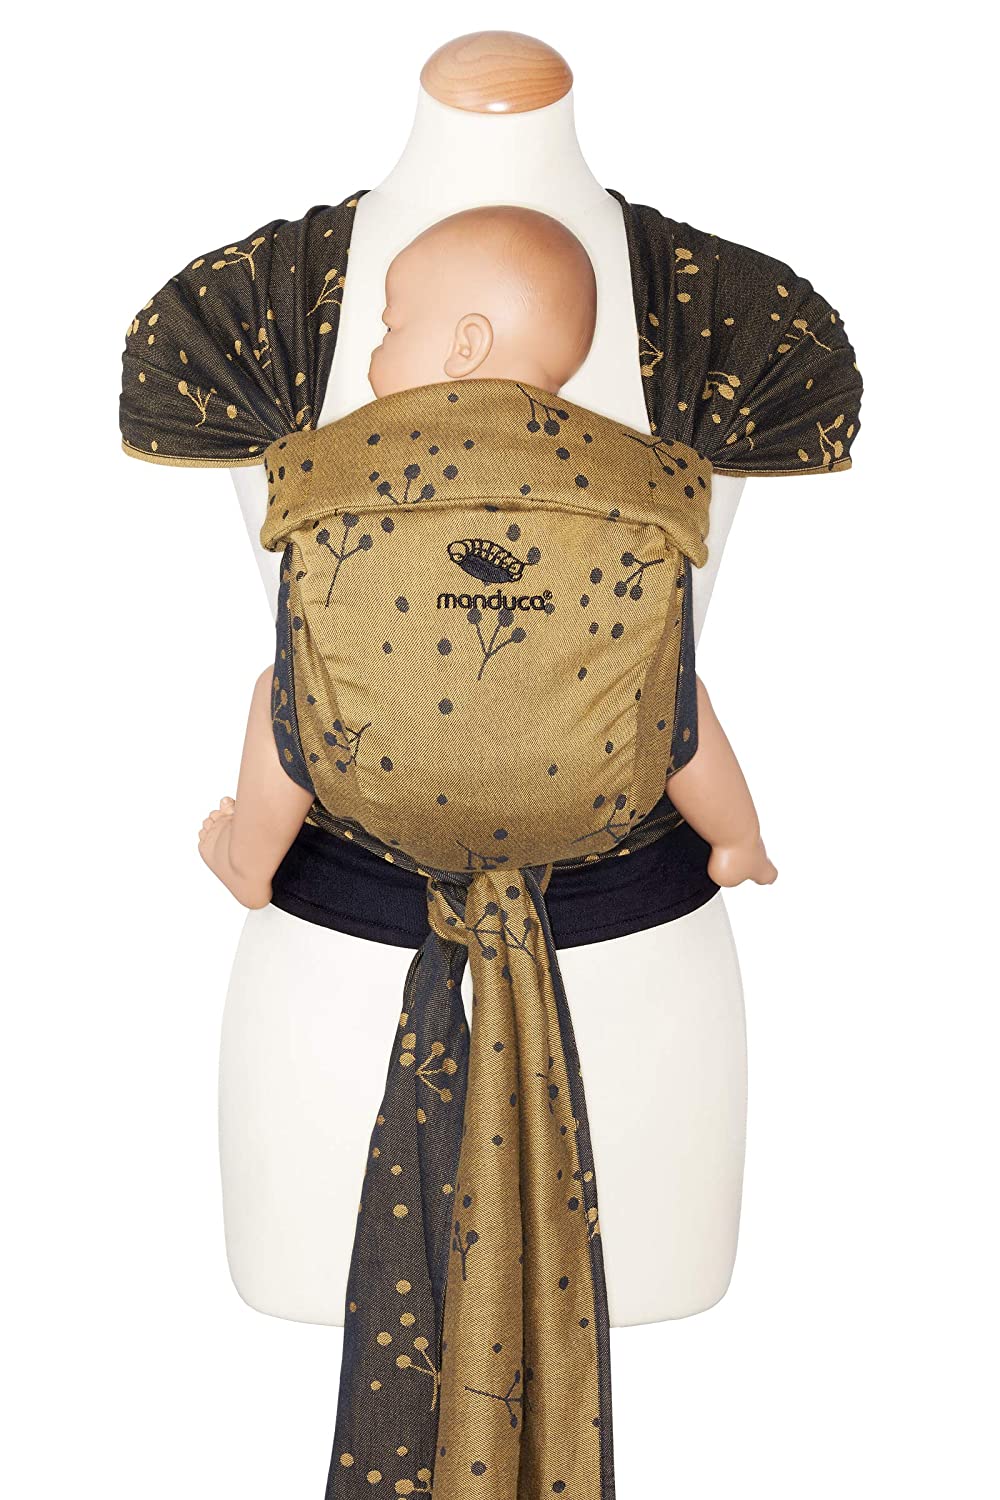 manduca Twist Baby Carrier for Newborns from Birth > Craspedia Gold < Newborn Carrier Made of Sling Fabric (Organic Cotton), Soft Waist Belt with Buckle, Fan and Tie Straps